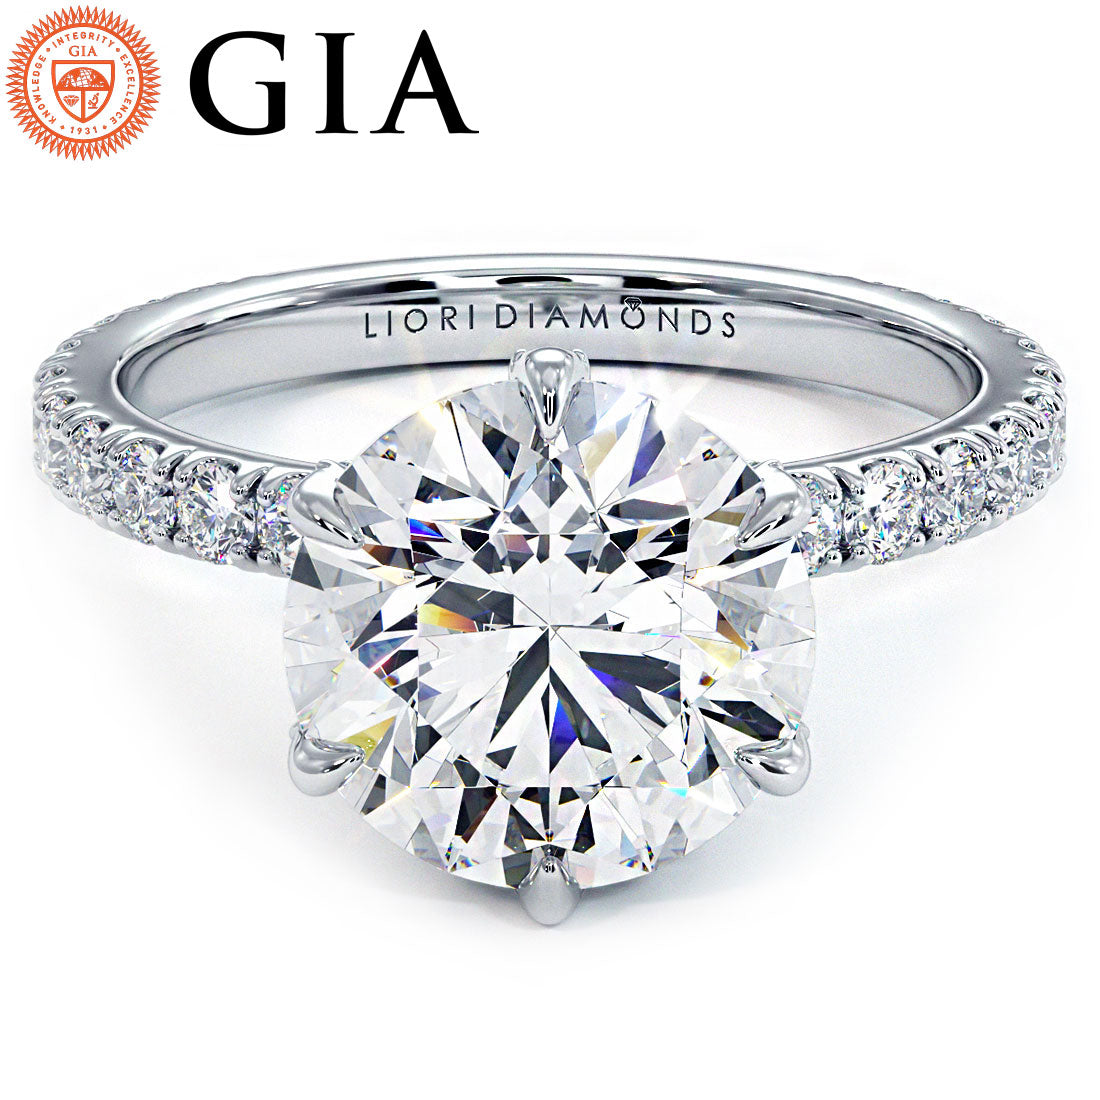 3.10ctw GIA Certified D-VS1 Round Brilliant Micropavé 6 Prong Petite Lab Grown Diamond Engagement Ring set in Platinum